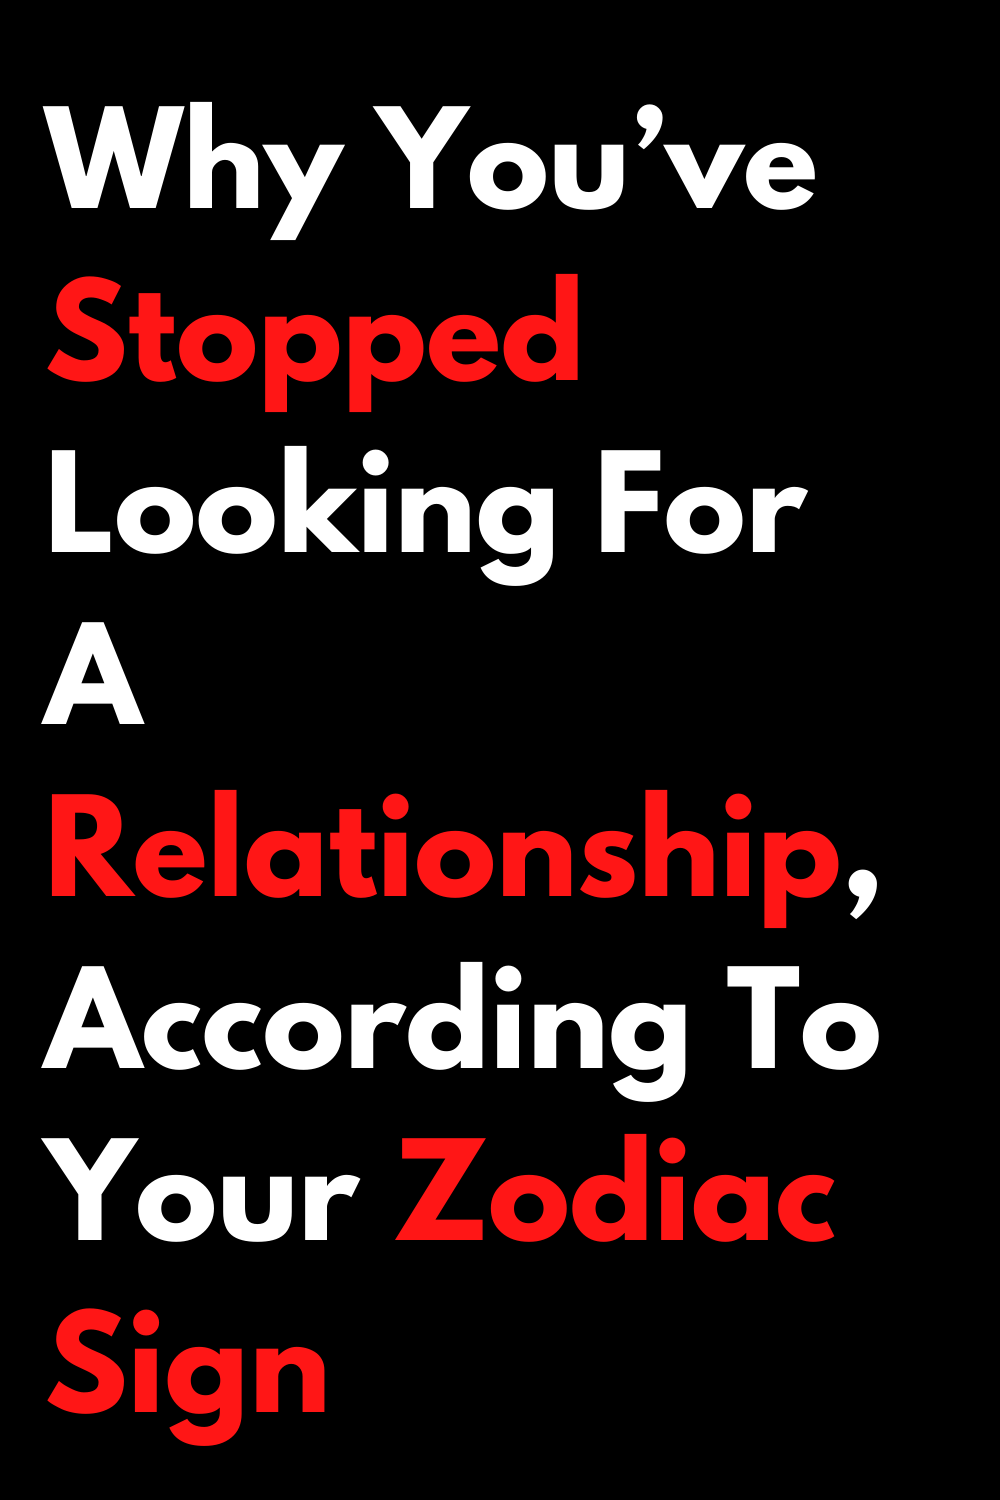 Why You’ve Stopped Looking For A Relationship, According To Your Zodiac Sign